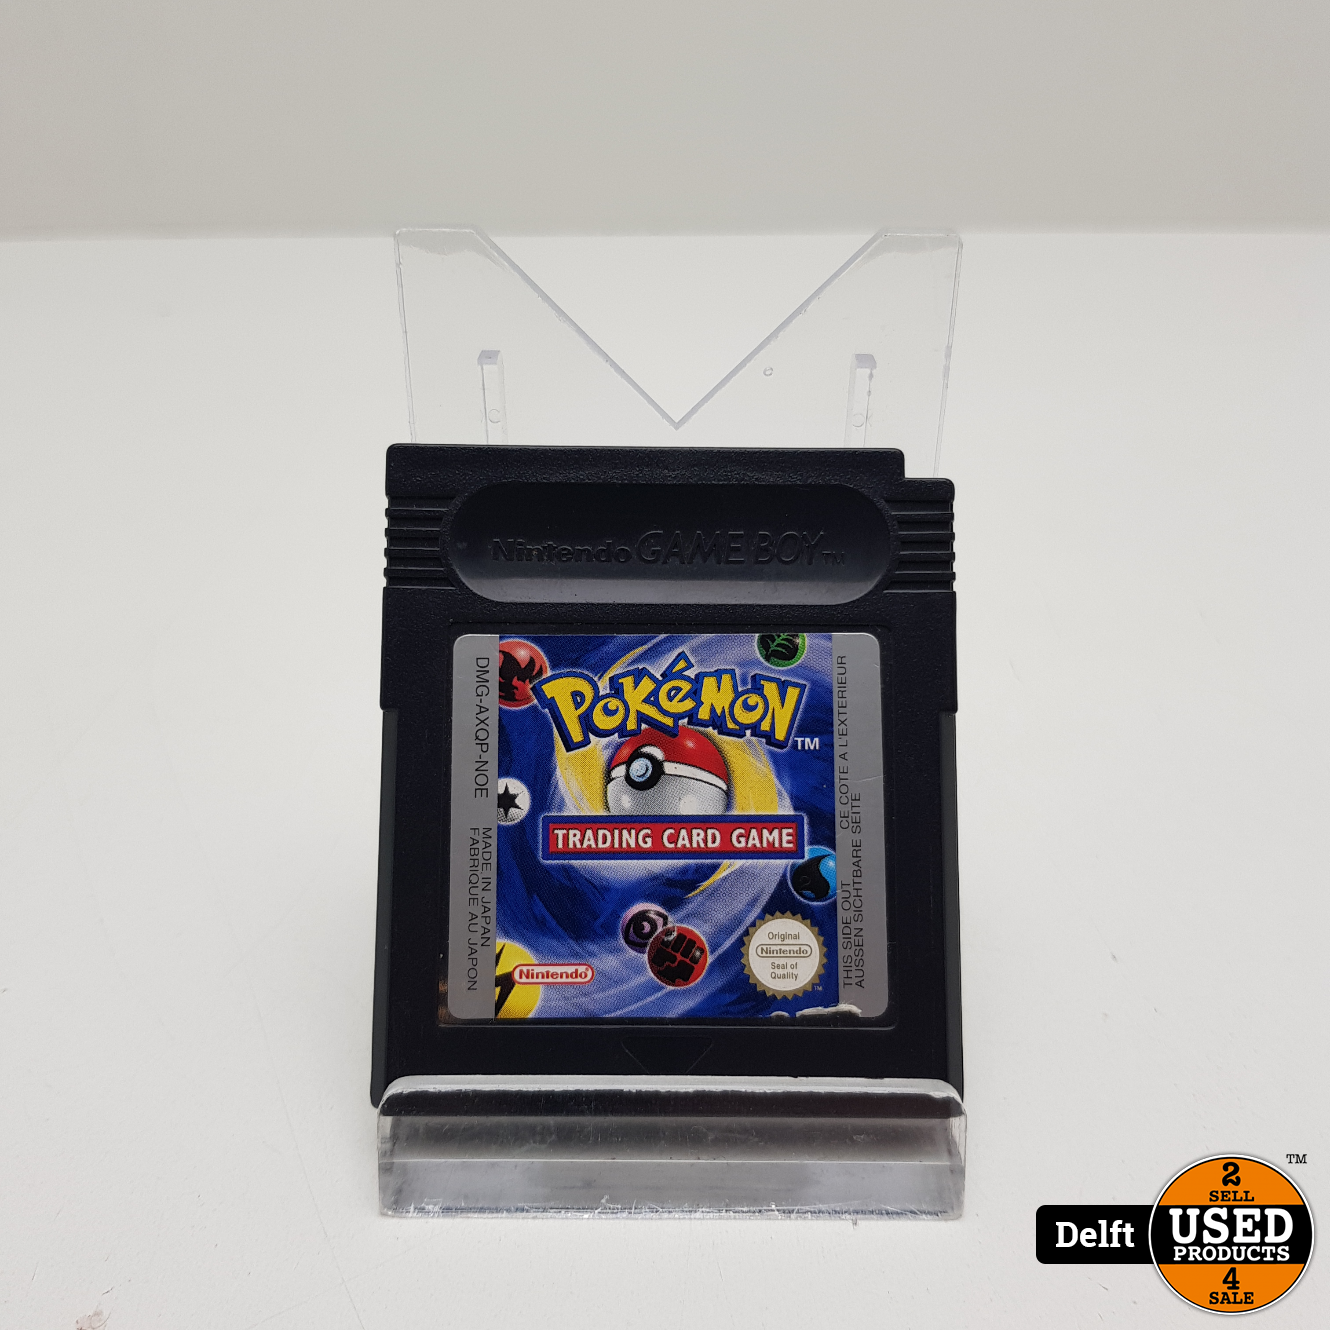 Pokemon Trading Card Game nette staat maand garantie - Products Delft